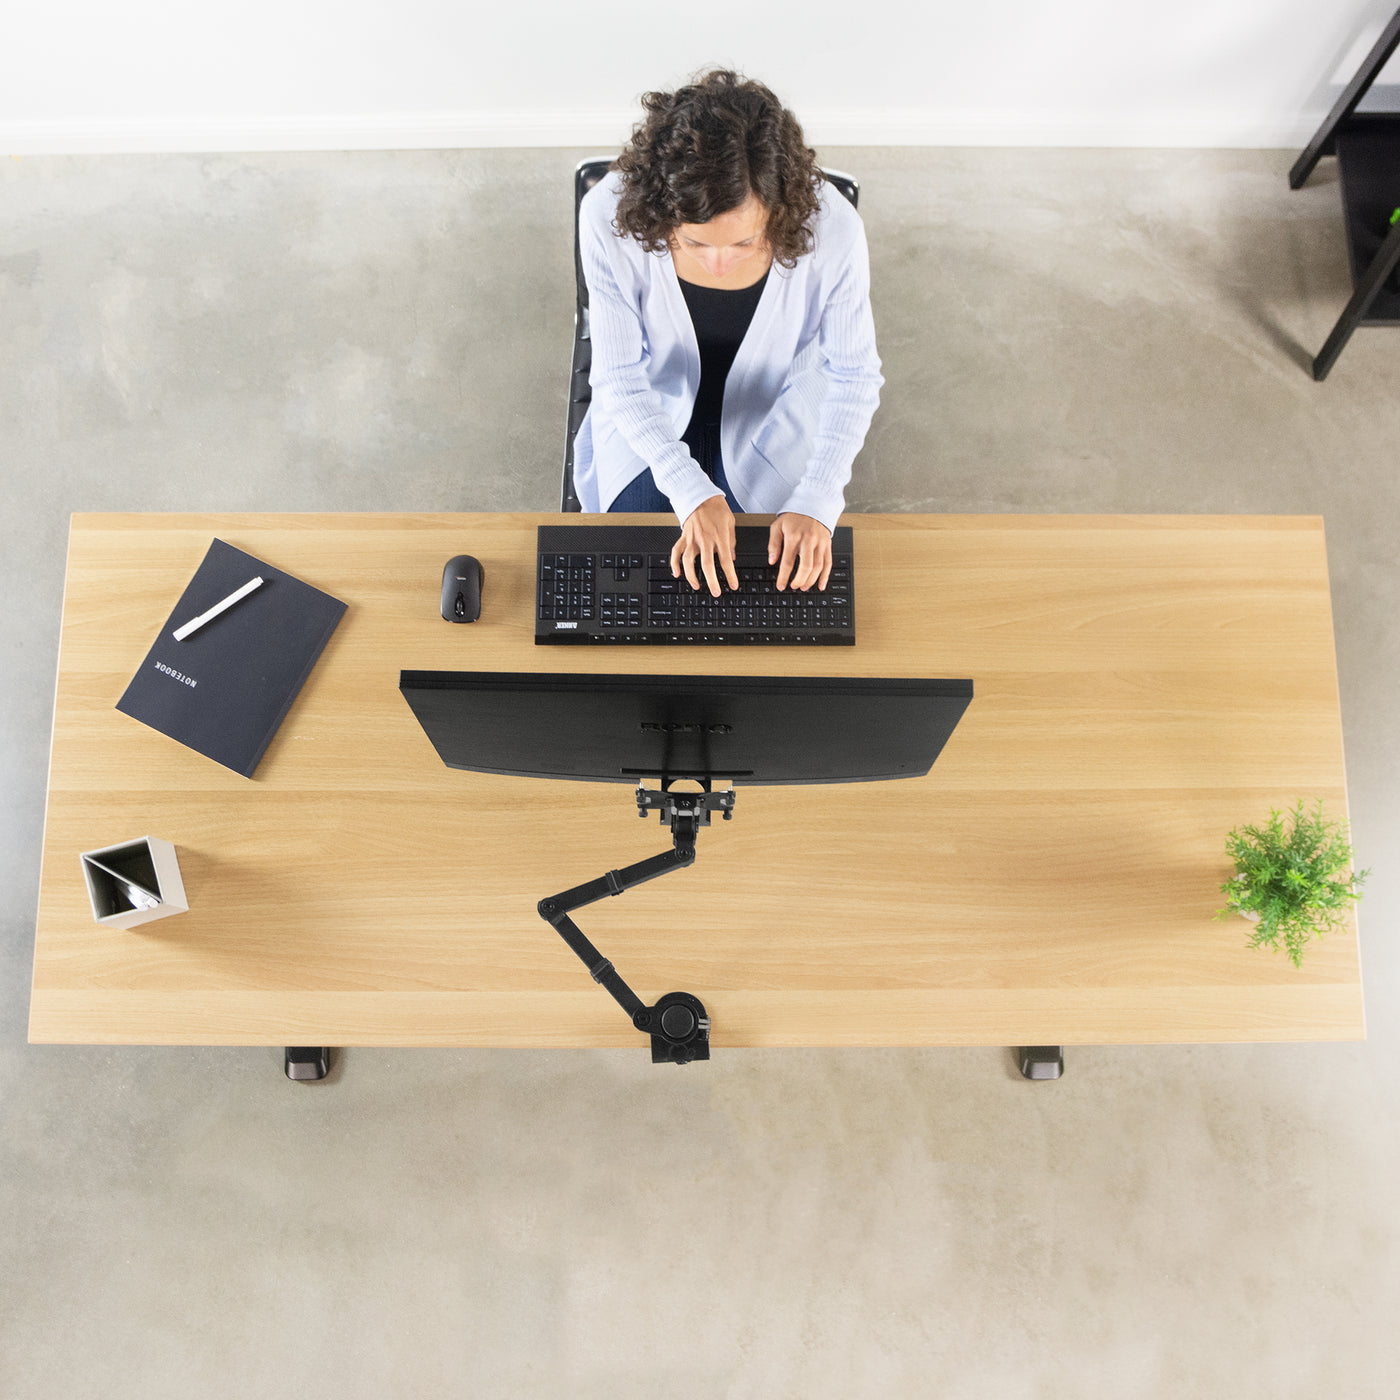 Ergonomic office set up with a woman working from a desk with a mounted BenQ monitor supported by a mount and VESA plate adapter bracket.